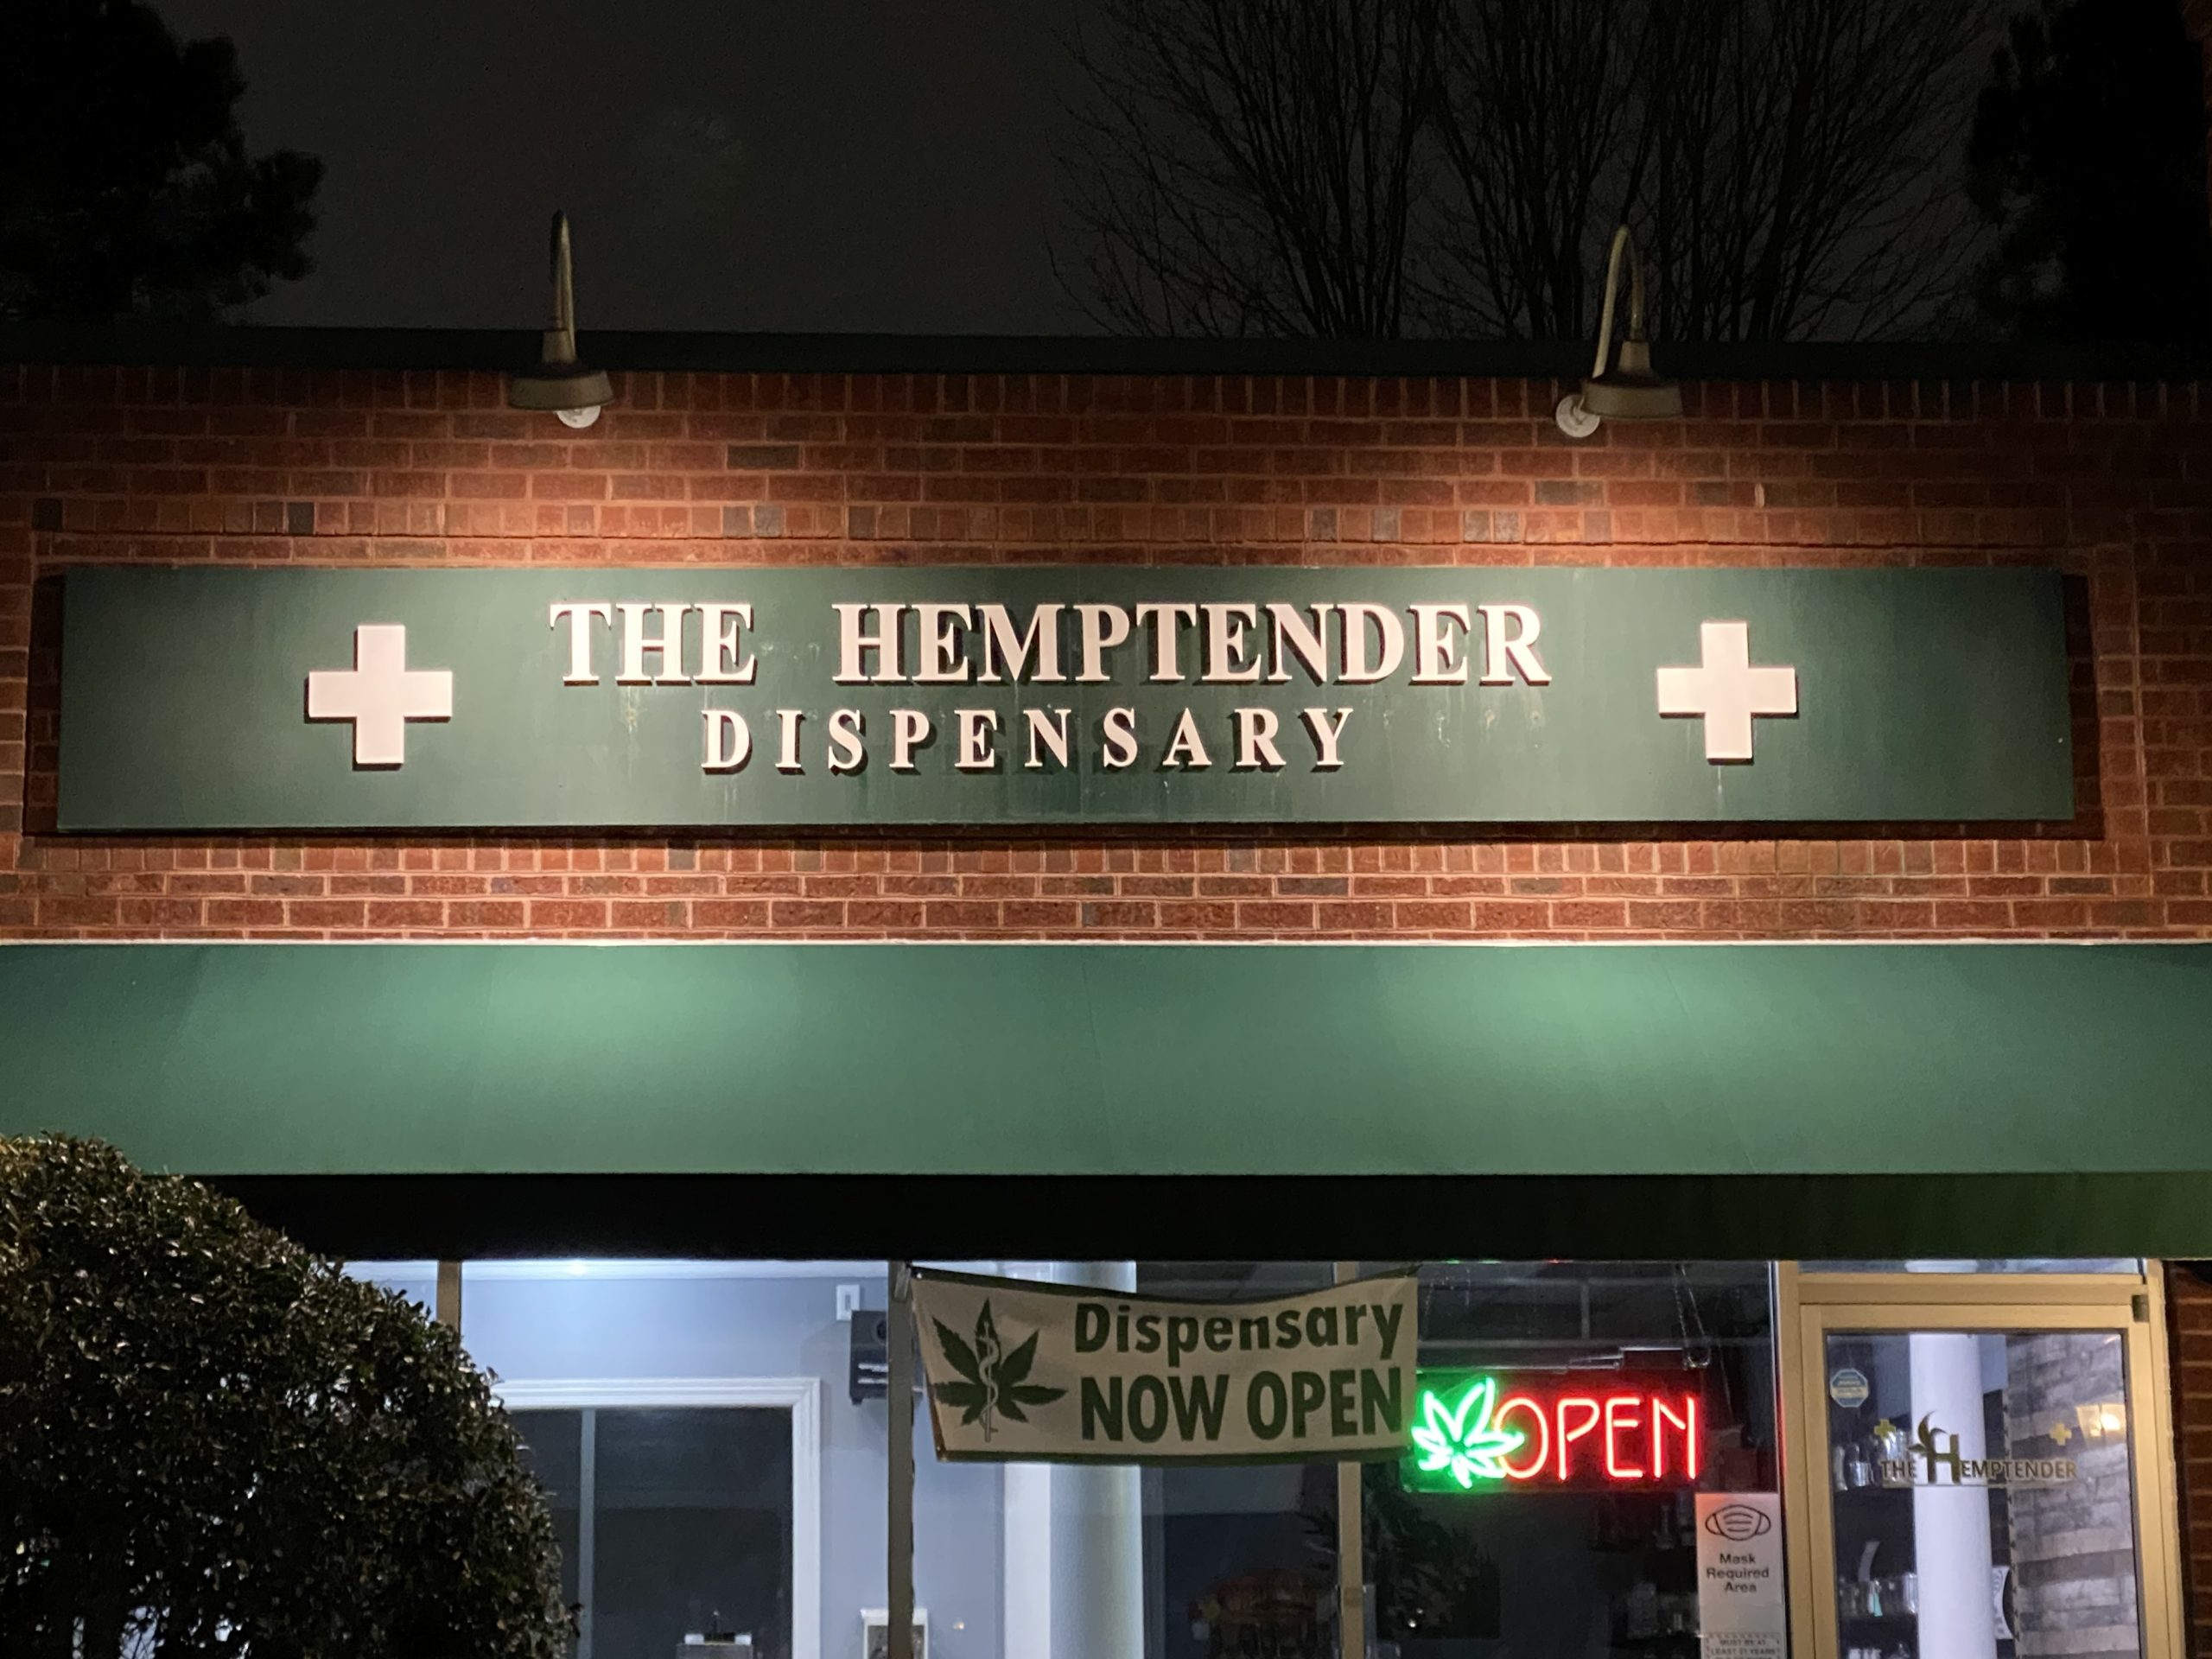 The Hemptender storefront in Cary, North Carolina at night